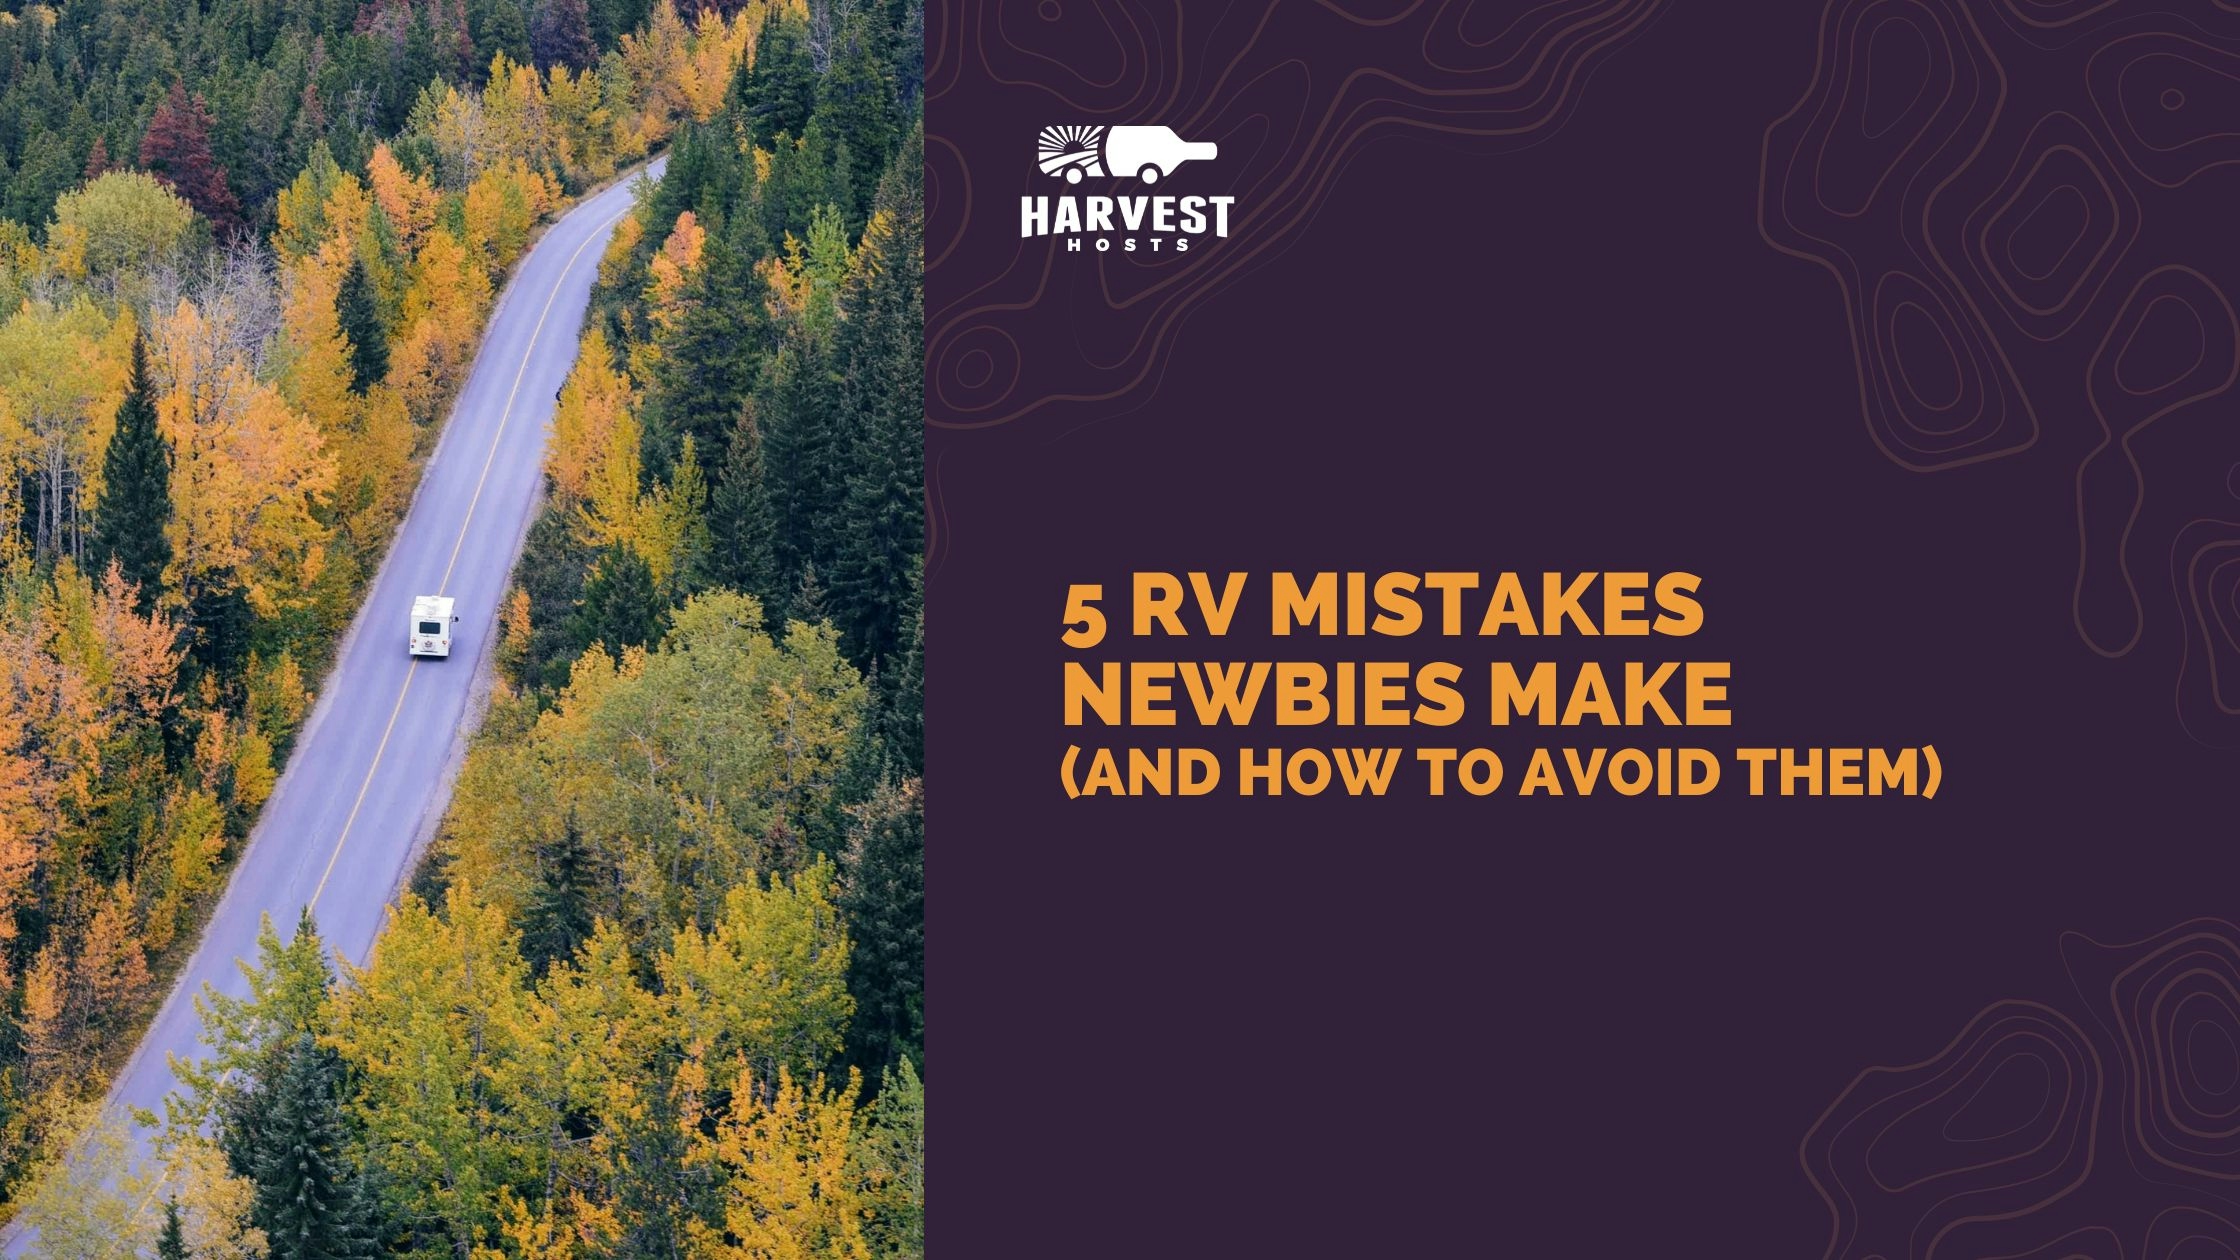 5 RV Mistakes Newbies Make (And How To Avoid Them) 